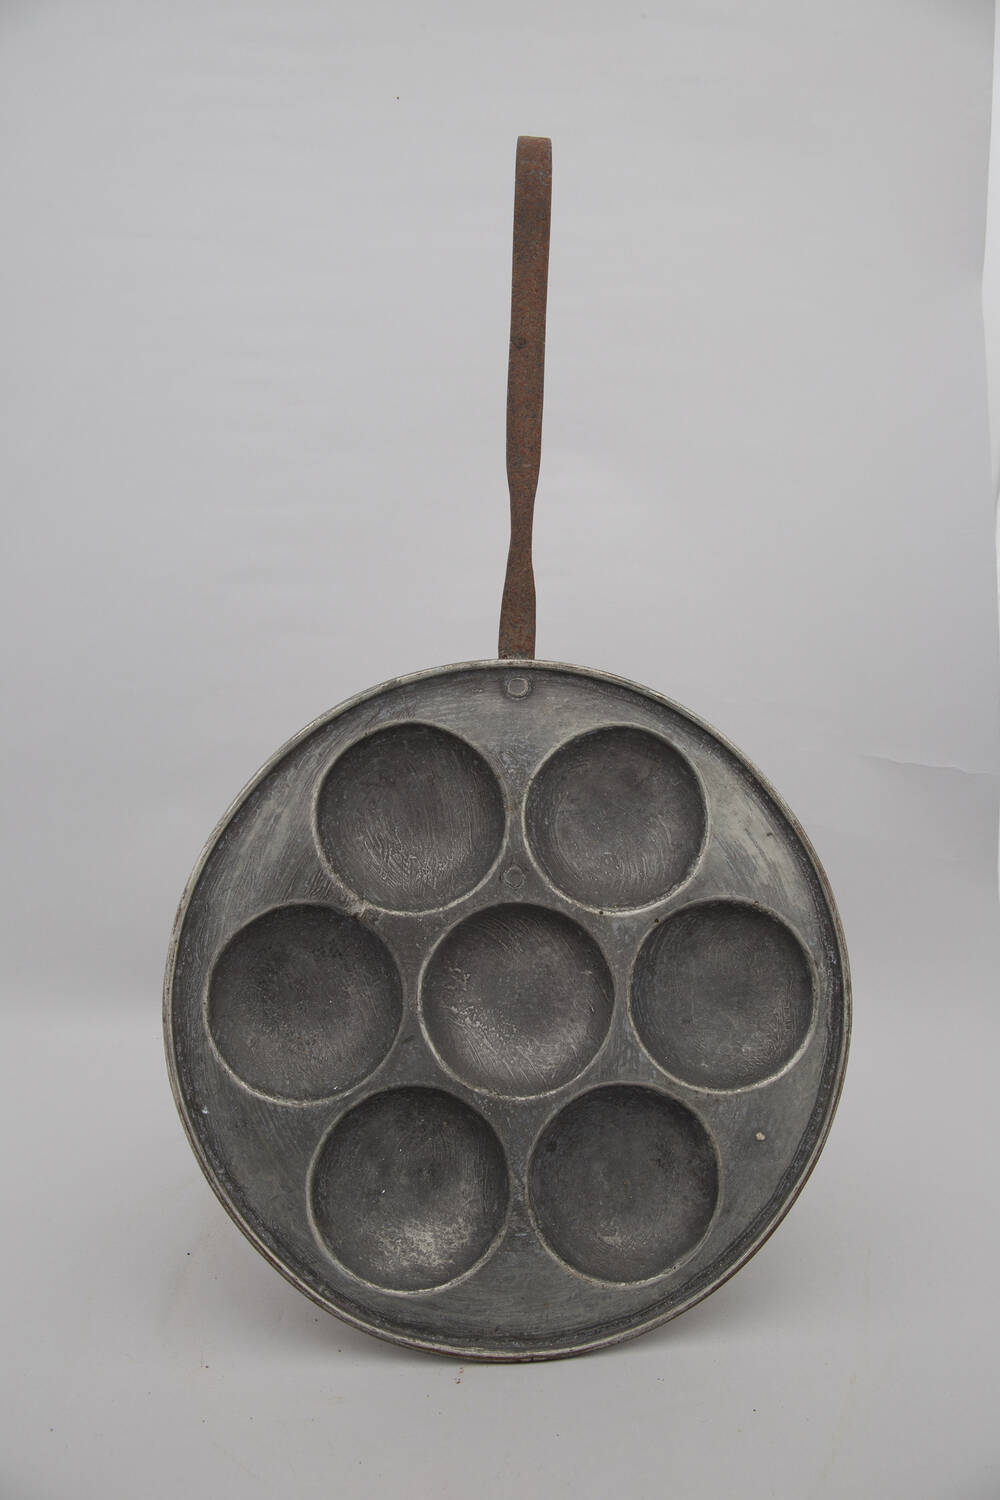 A circular metal pan that looks a bit like a frying pan, except that it has 7 round indentations in the pan.